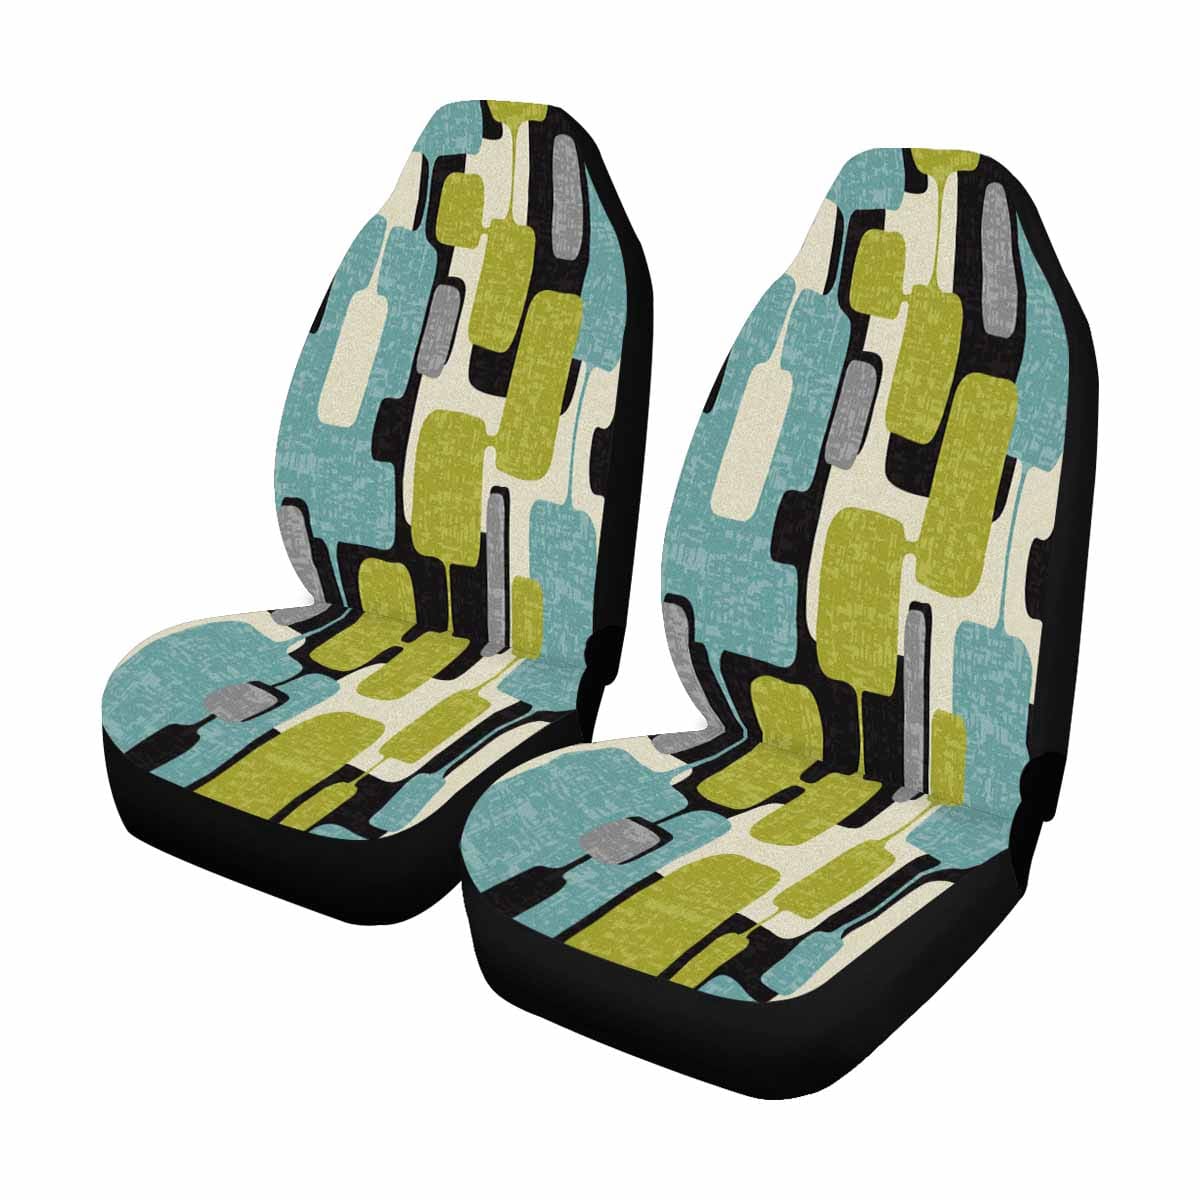 Kate McEnroe New York Set of 2 Mid Century Modern Geometric Car Seat Covers in Aqua Blue, Lime Green, Gray, and Cream Car Seat Covers One Size DG1452072DXH2742D